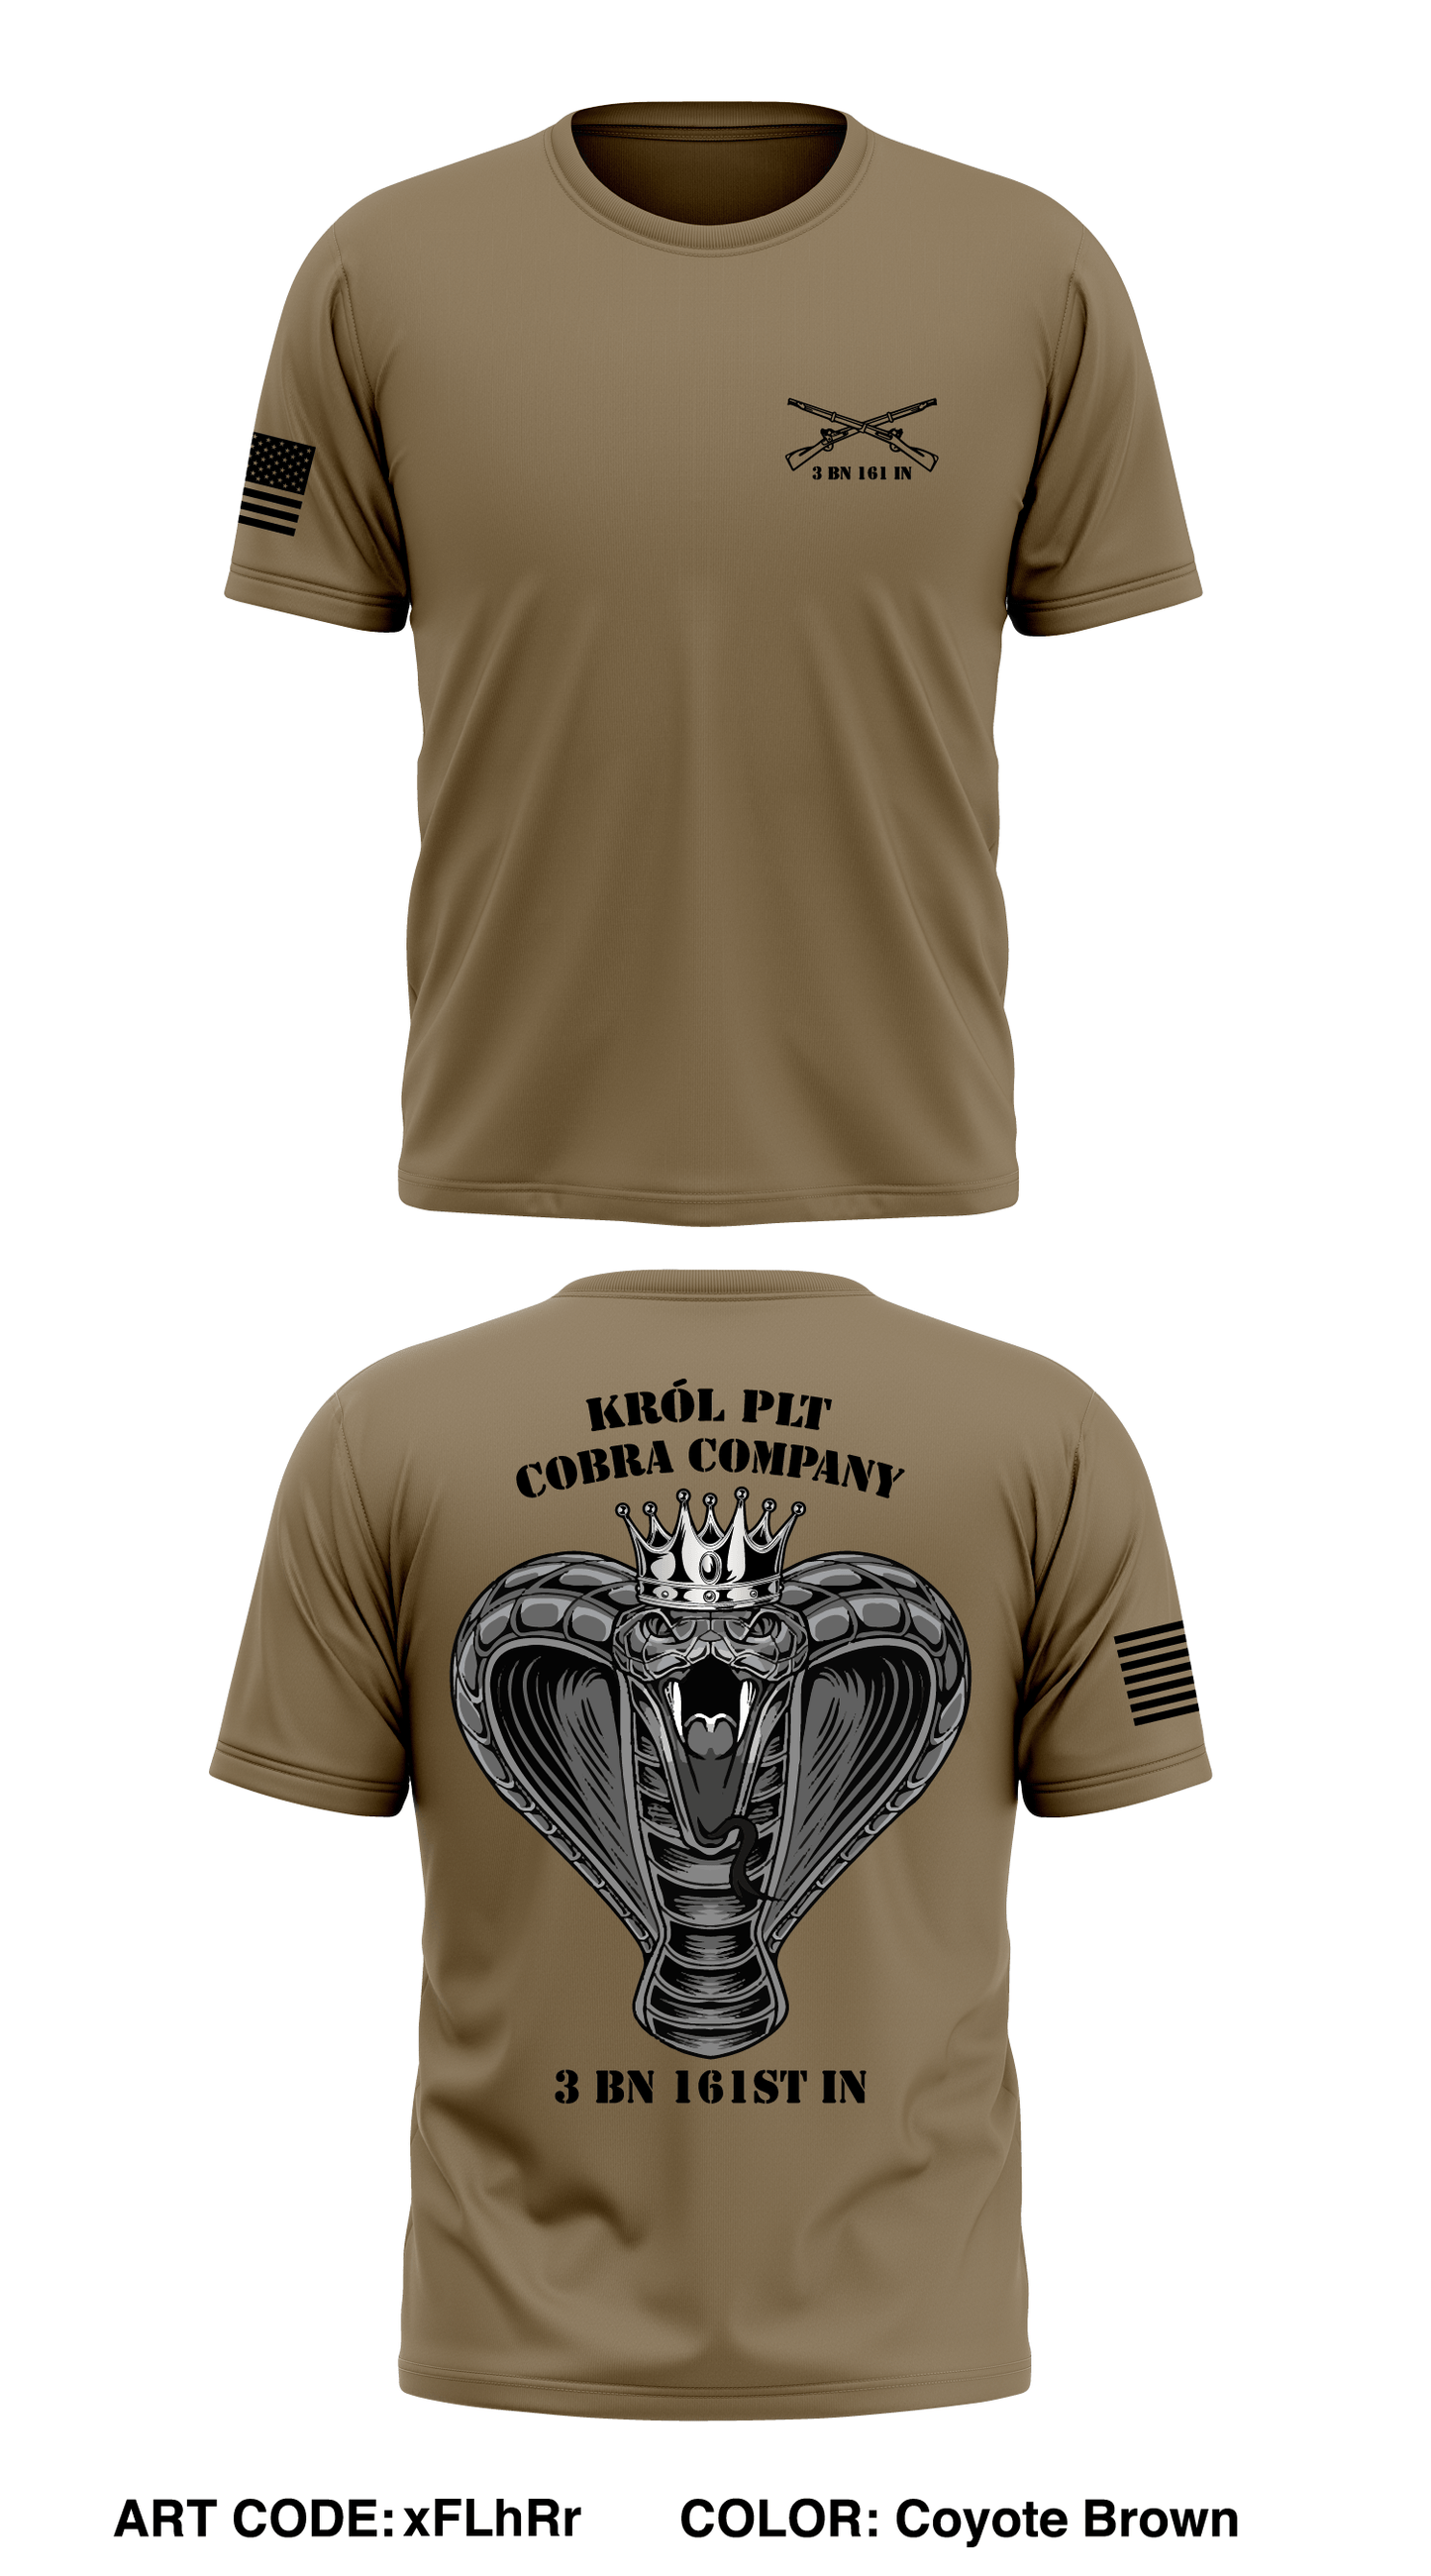 C Co, 3 BN, 161st INF Store 1 Core Men's SS Performance Tee - xFLhRr